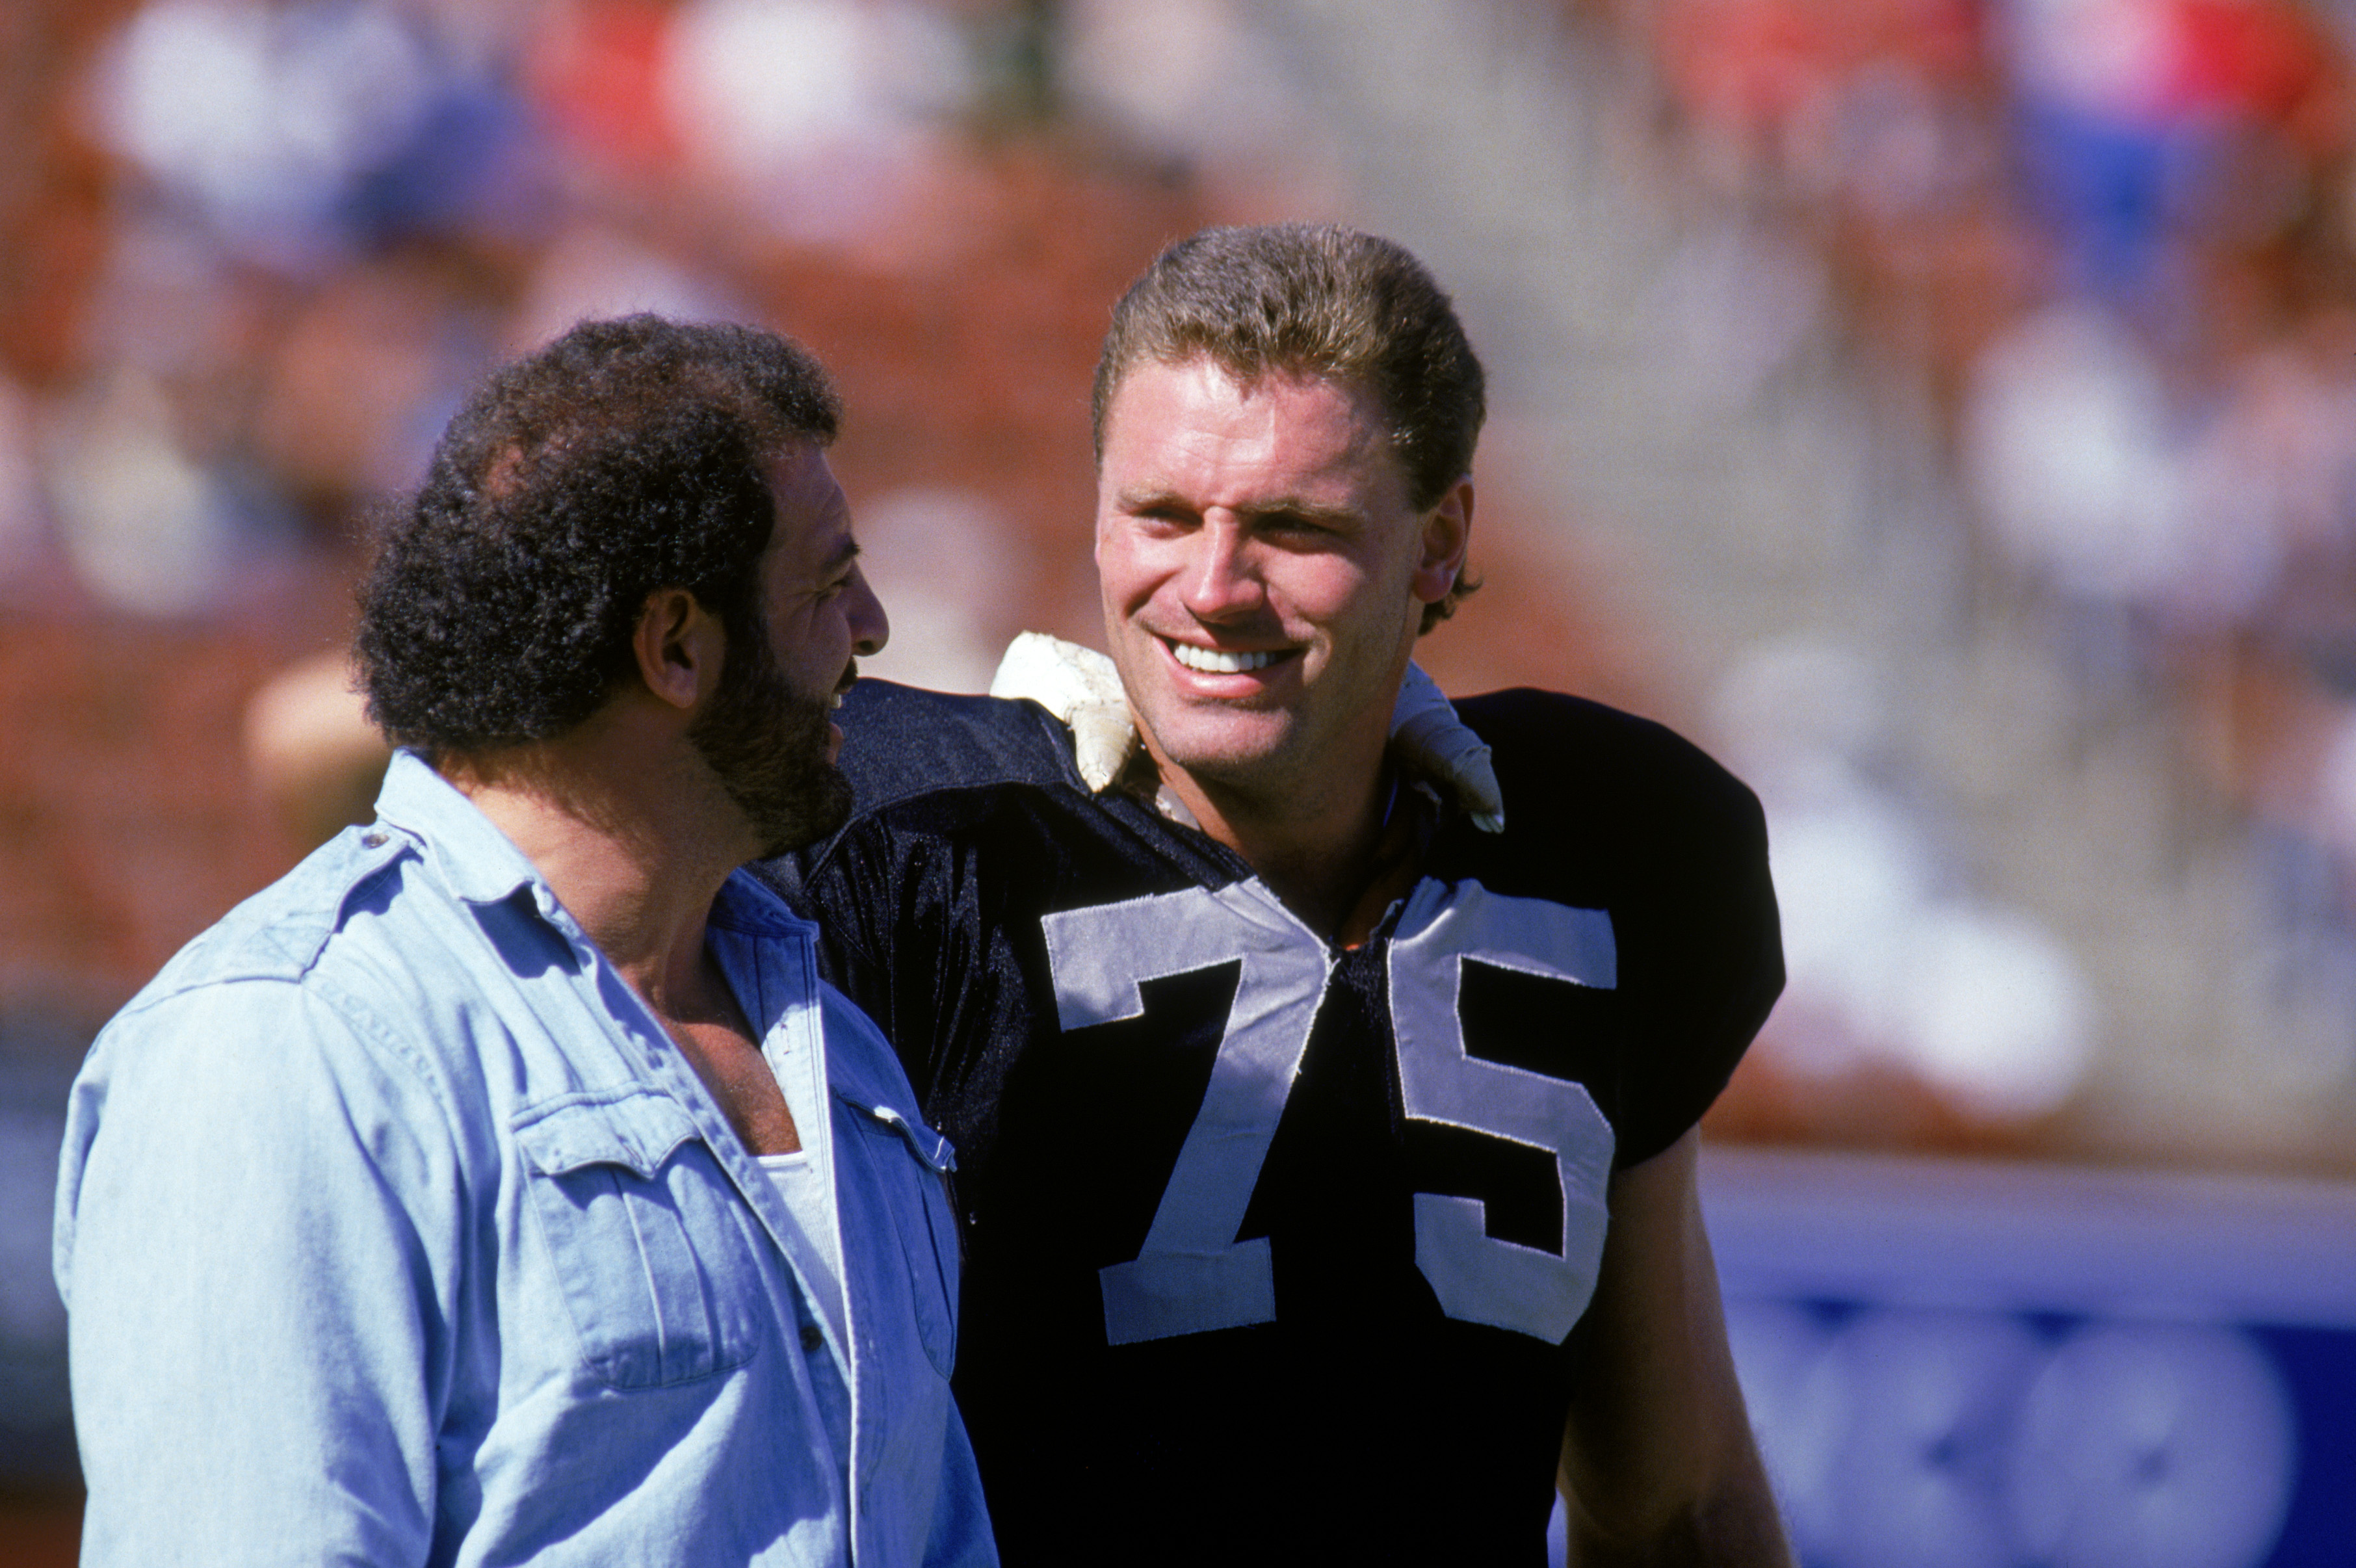 1987:  Defensive lineman Howie Long #75 of the Los Angeles Raiders talks with teammate Lyle Alzado during a game against the Denver Broncos in 1984.  (Photo by Tony Duffy/Getty Images)